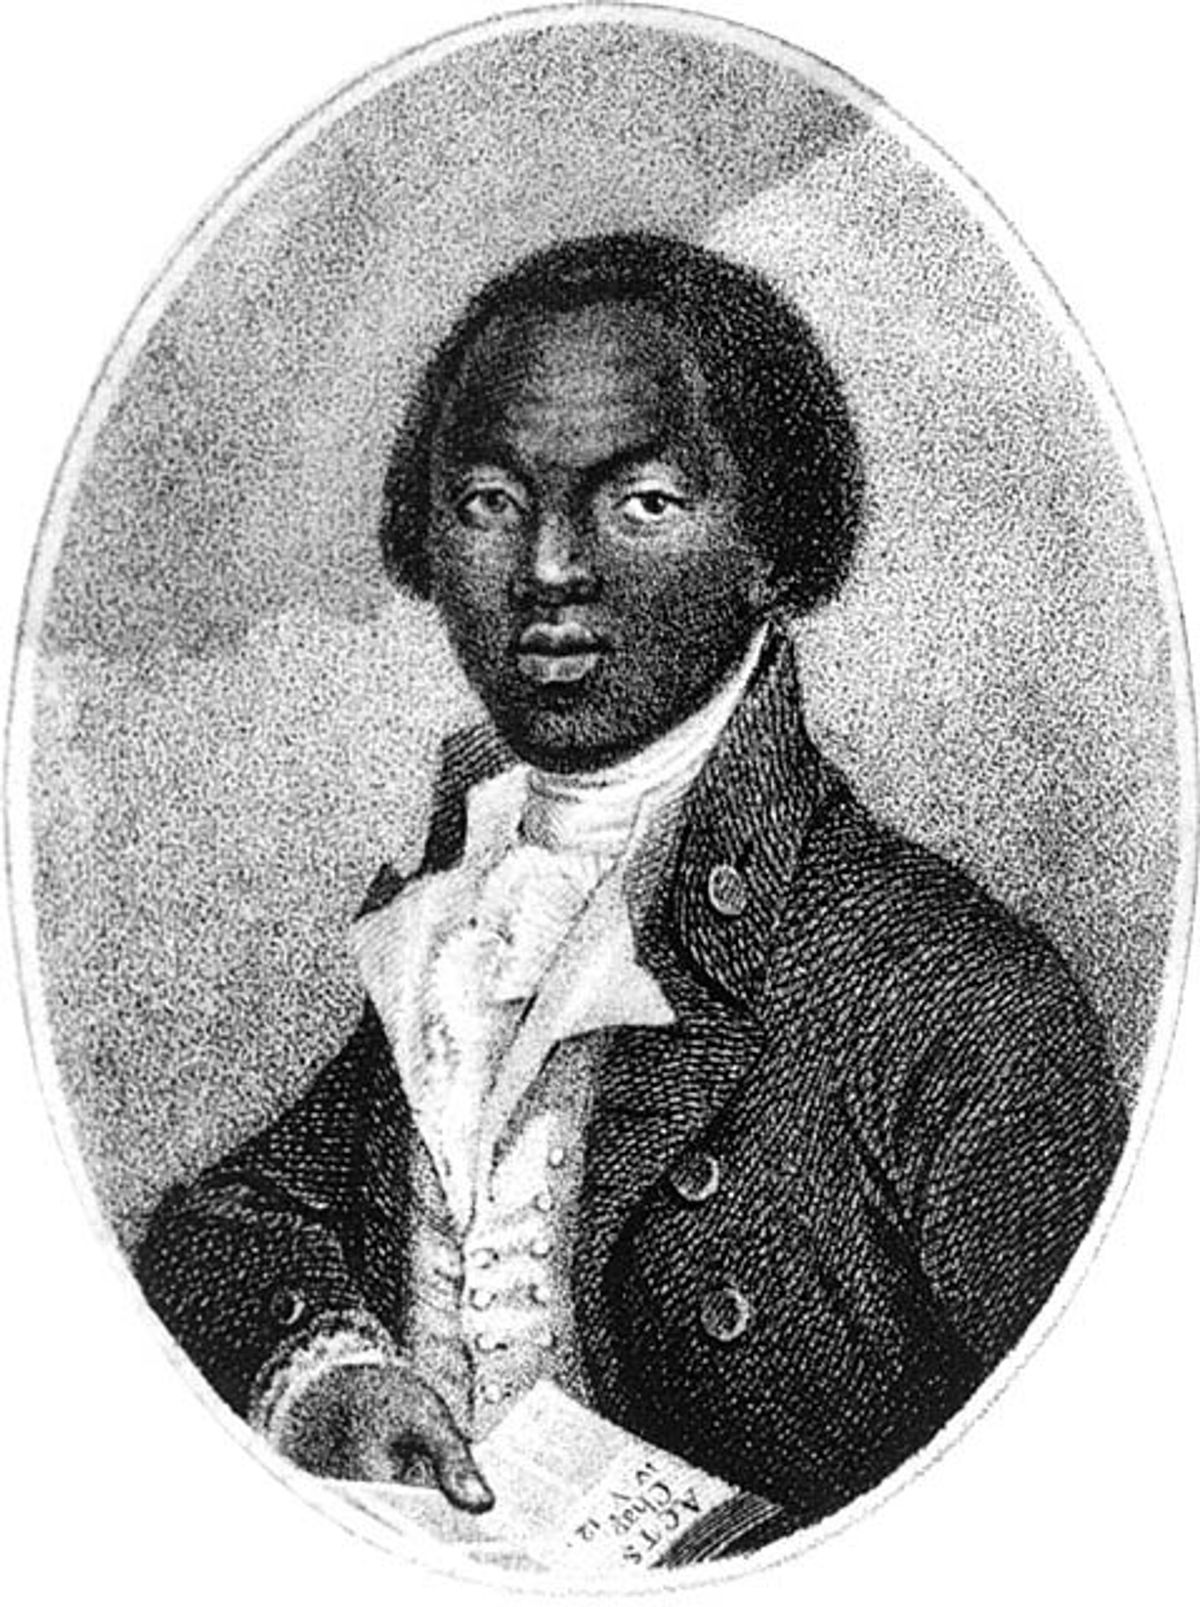 The Interesting Narrative Of The Life Of Olaudah Equiano